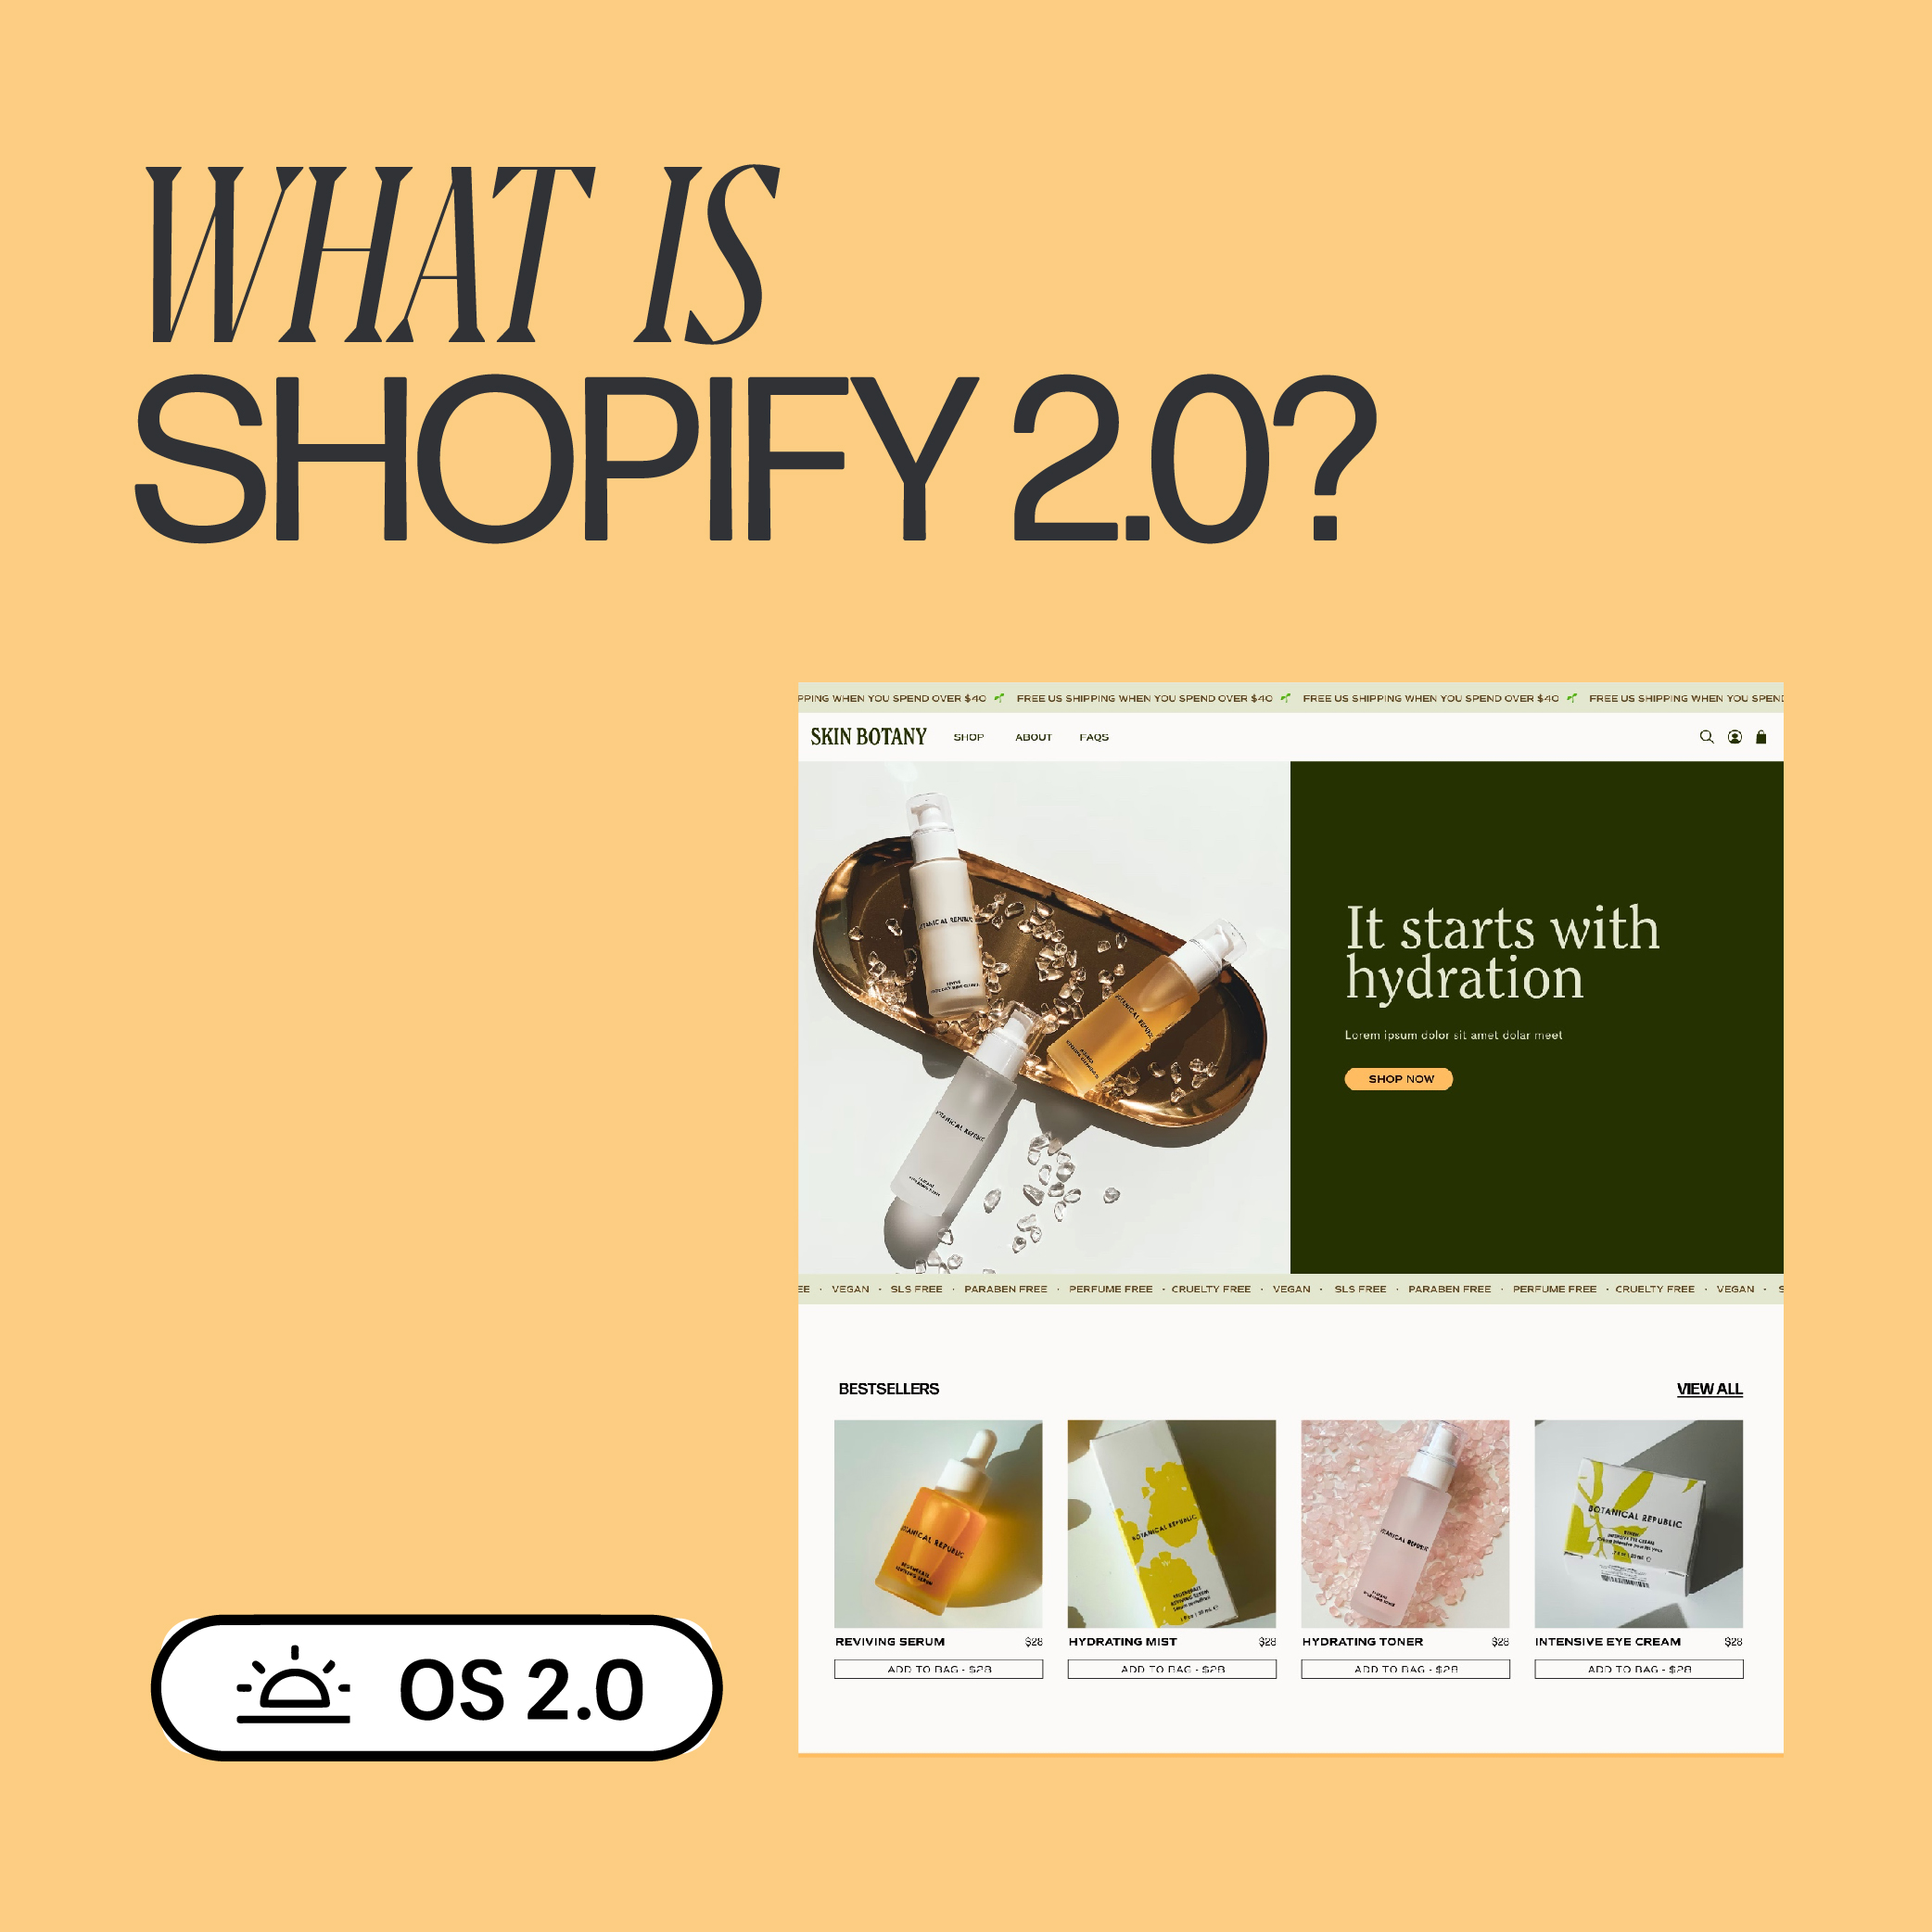 What is Shopify 2.0?